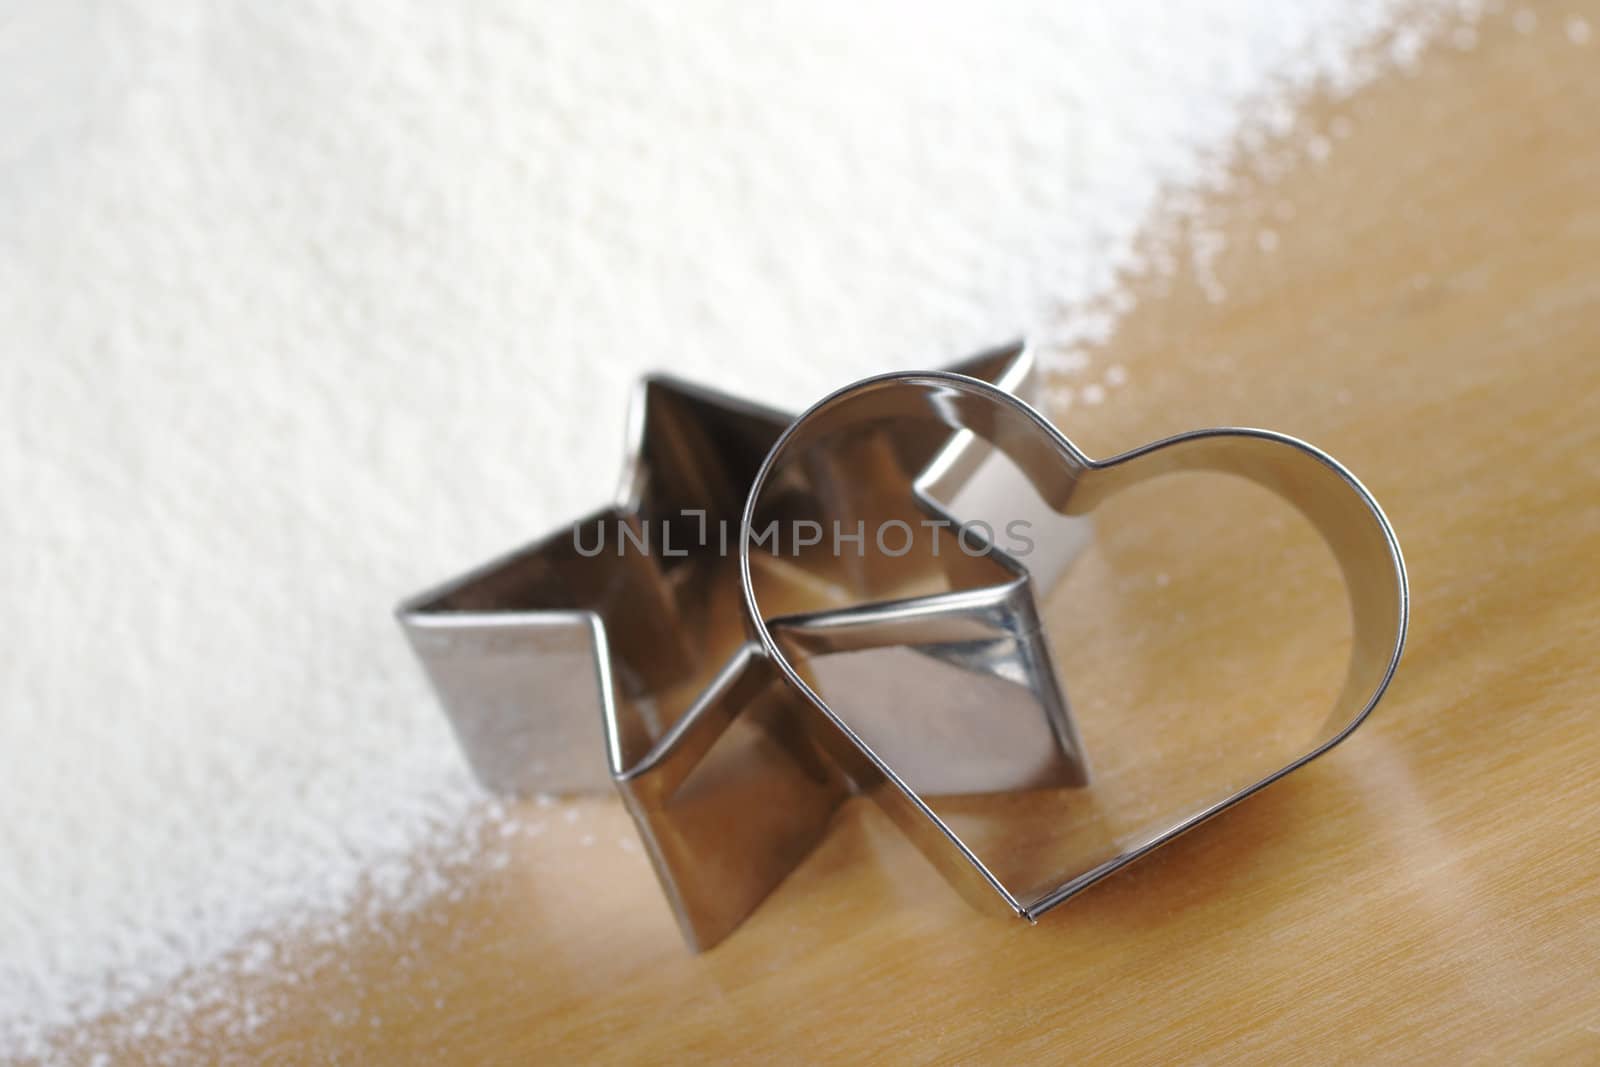 Heart and star shaped cookie cutters with flour in the background (Selective Focus, Focus on the heart cookie cutter)